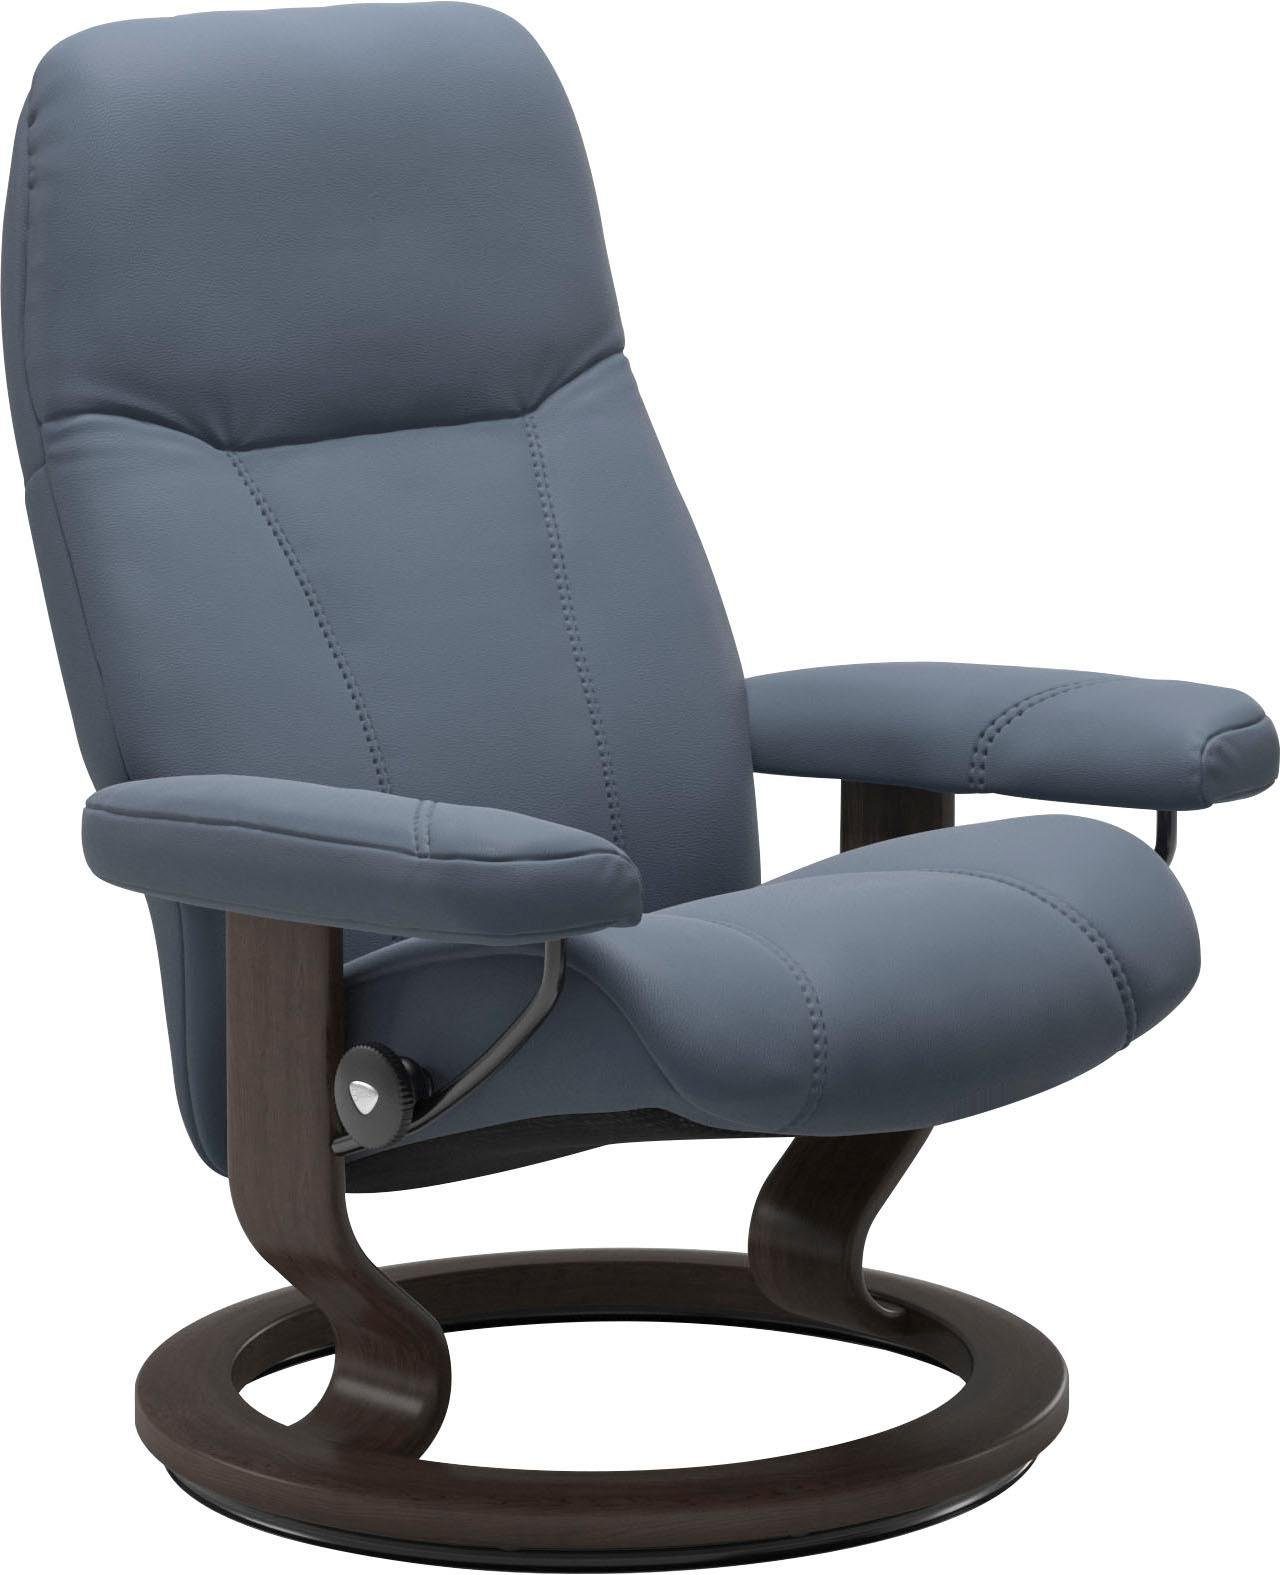 Stressless® Relaxsessel Consul, mit Classic Base, Größe L, Gestell Wenge | Funktionssessel